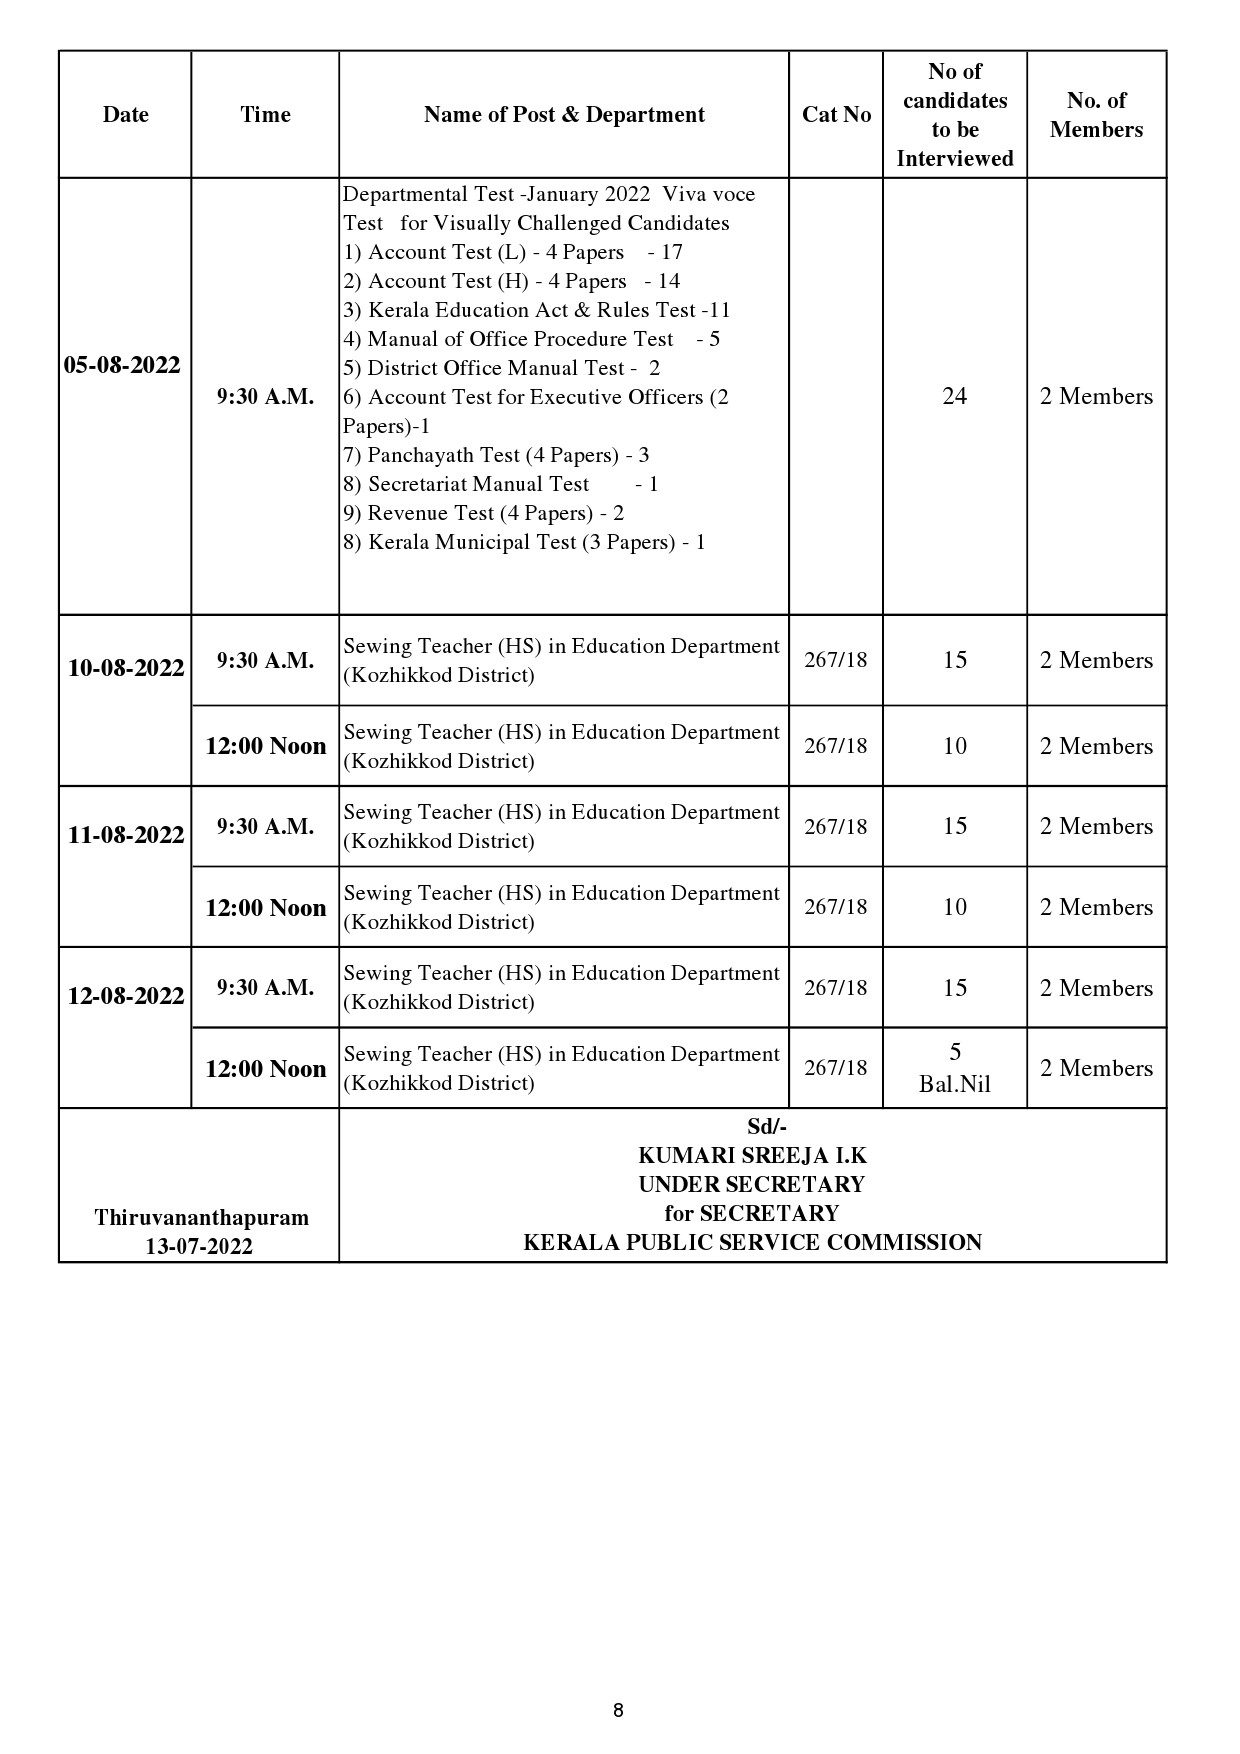 Revised Interview Programme For The Month Of August 2022 - Notification Image 8